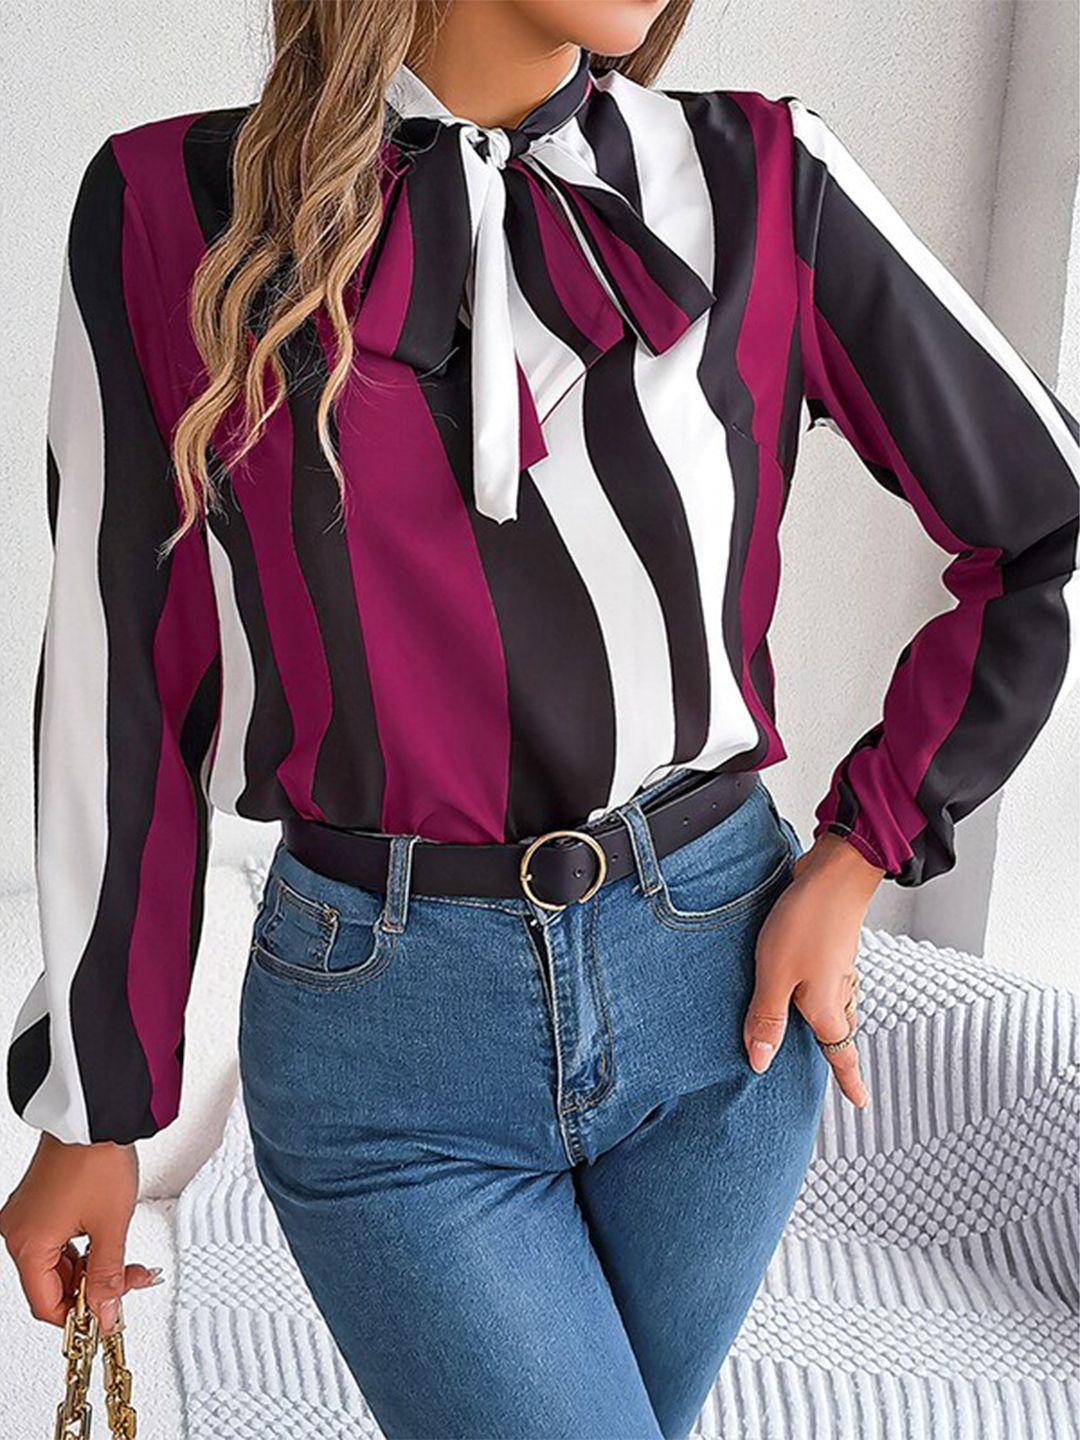 stylecast striped shirt style top